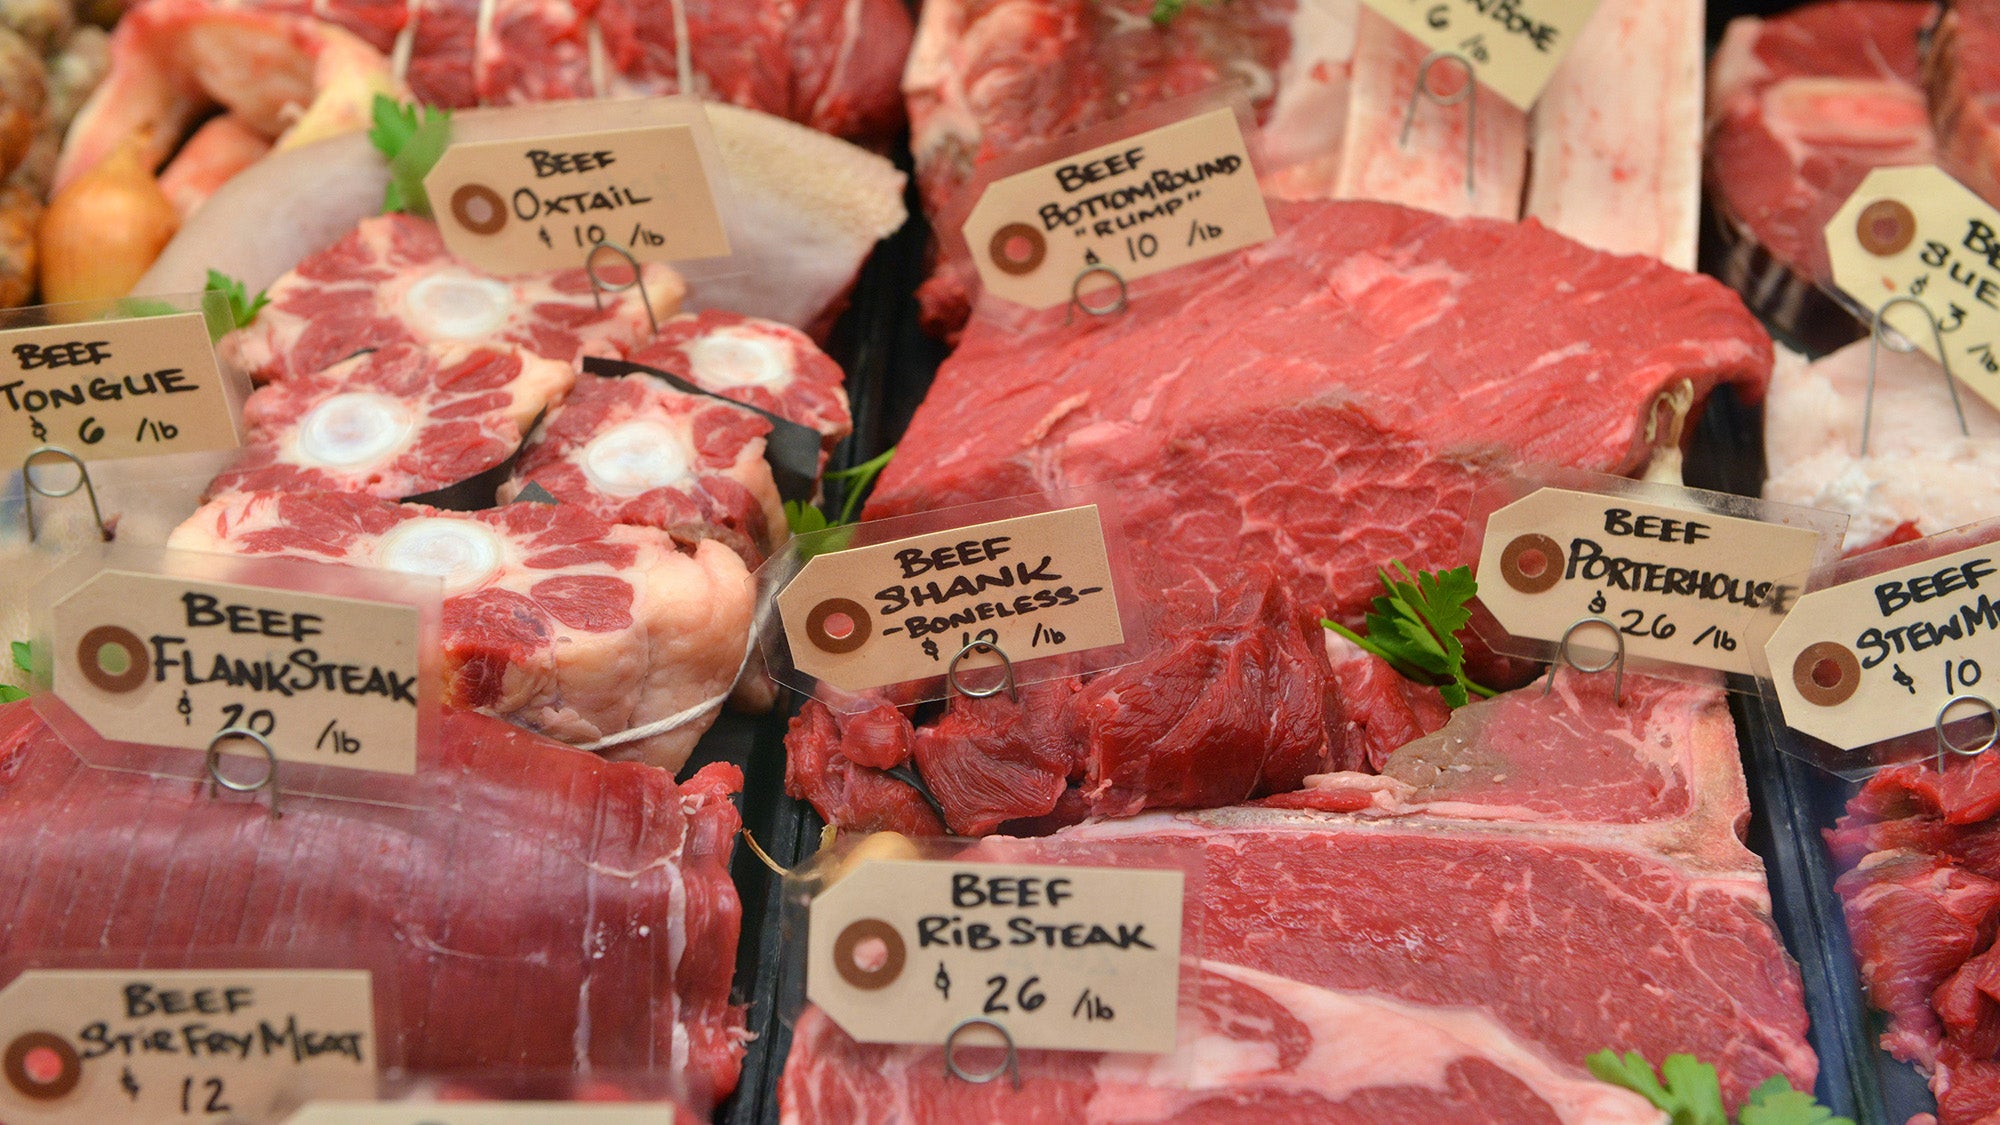 How To Get The Most Out Of Your International Butcher Shop - Food Republic